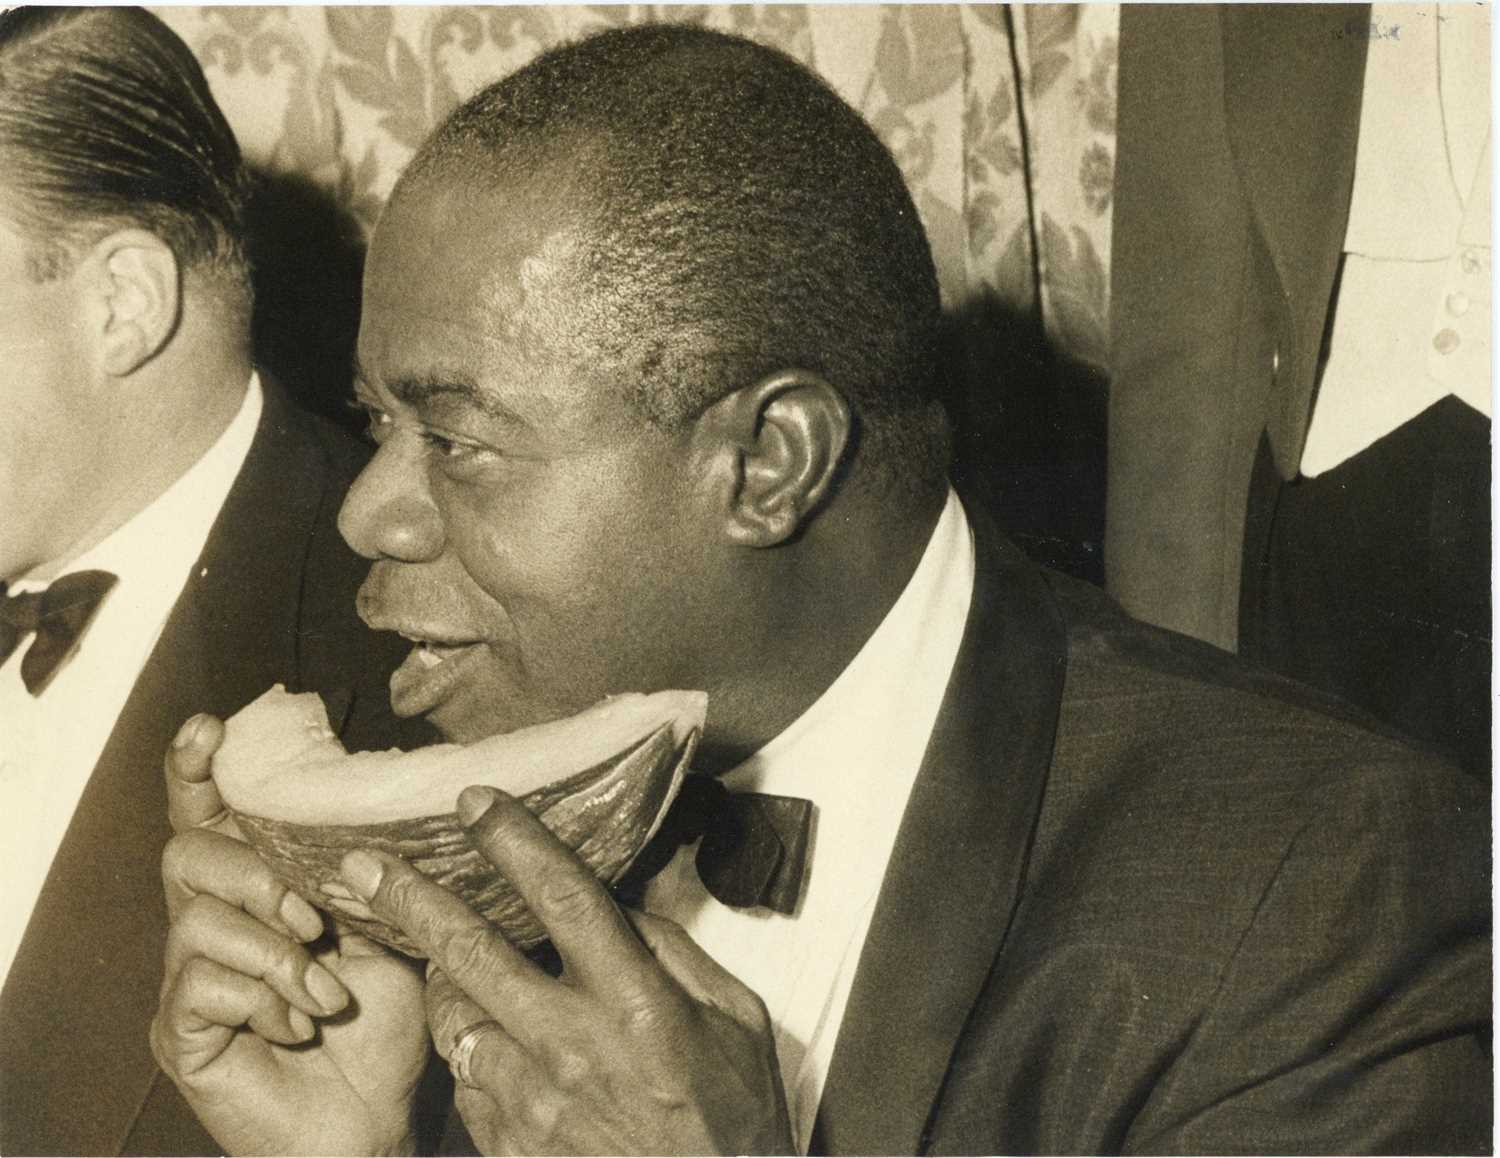 Lot 47 - A Photograph of Louis Armstrong